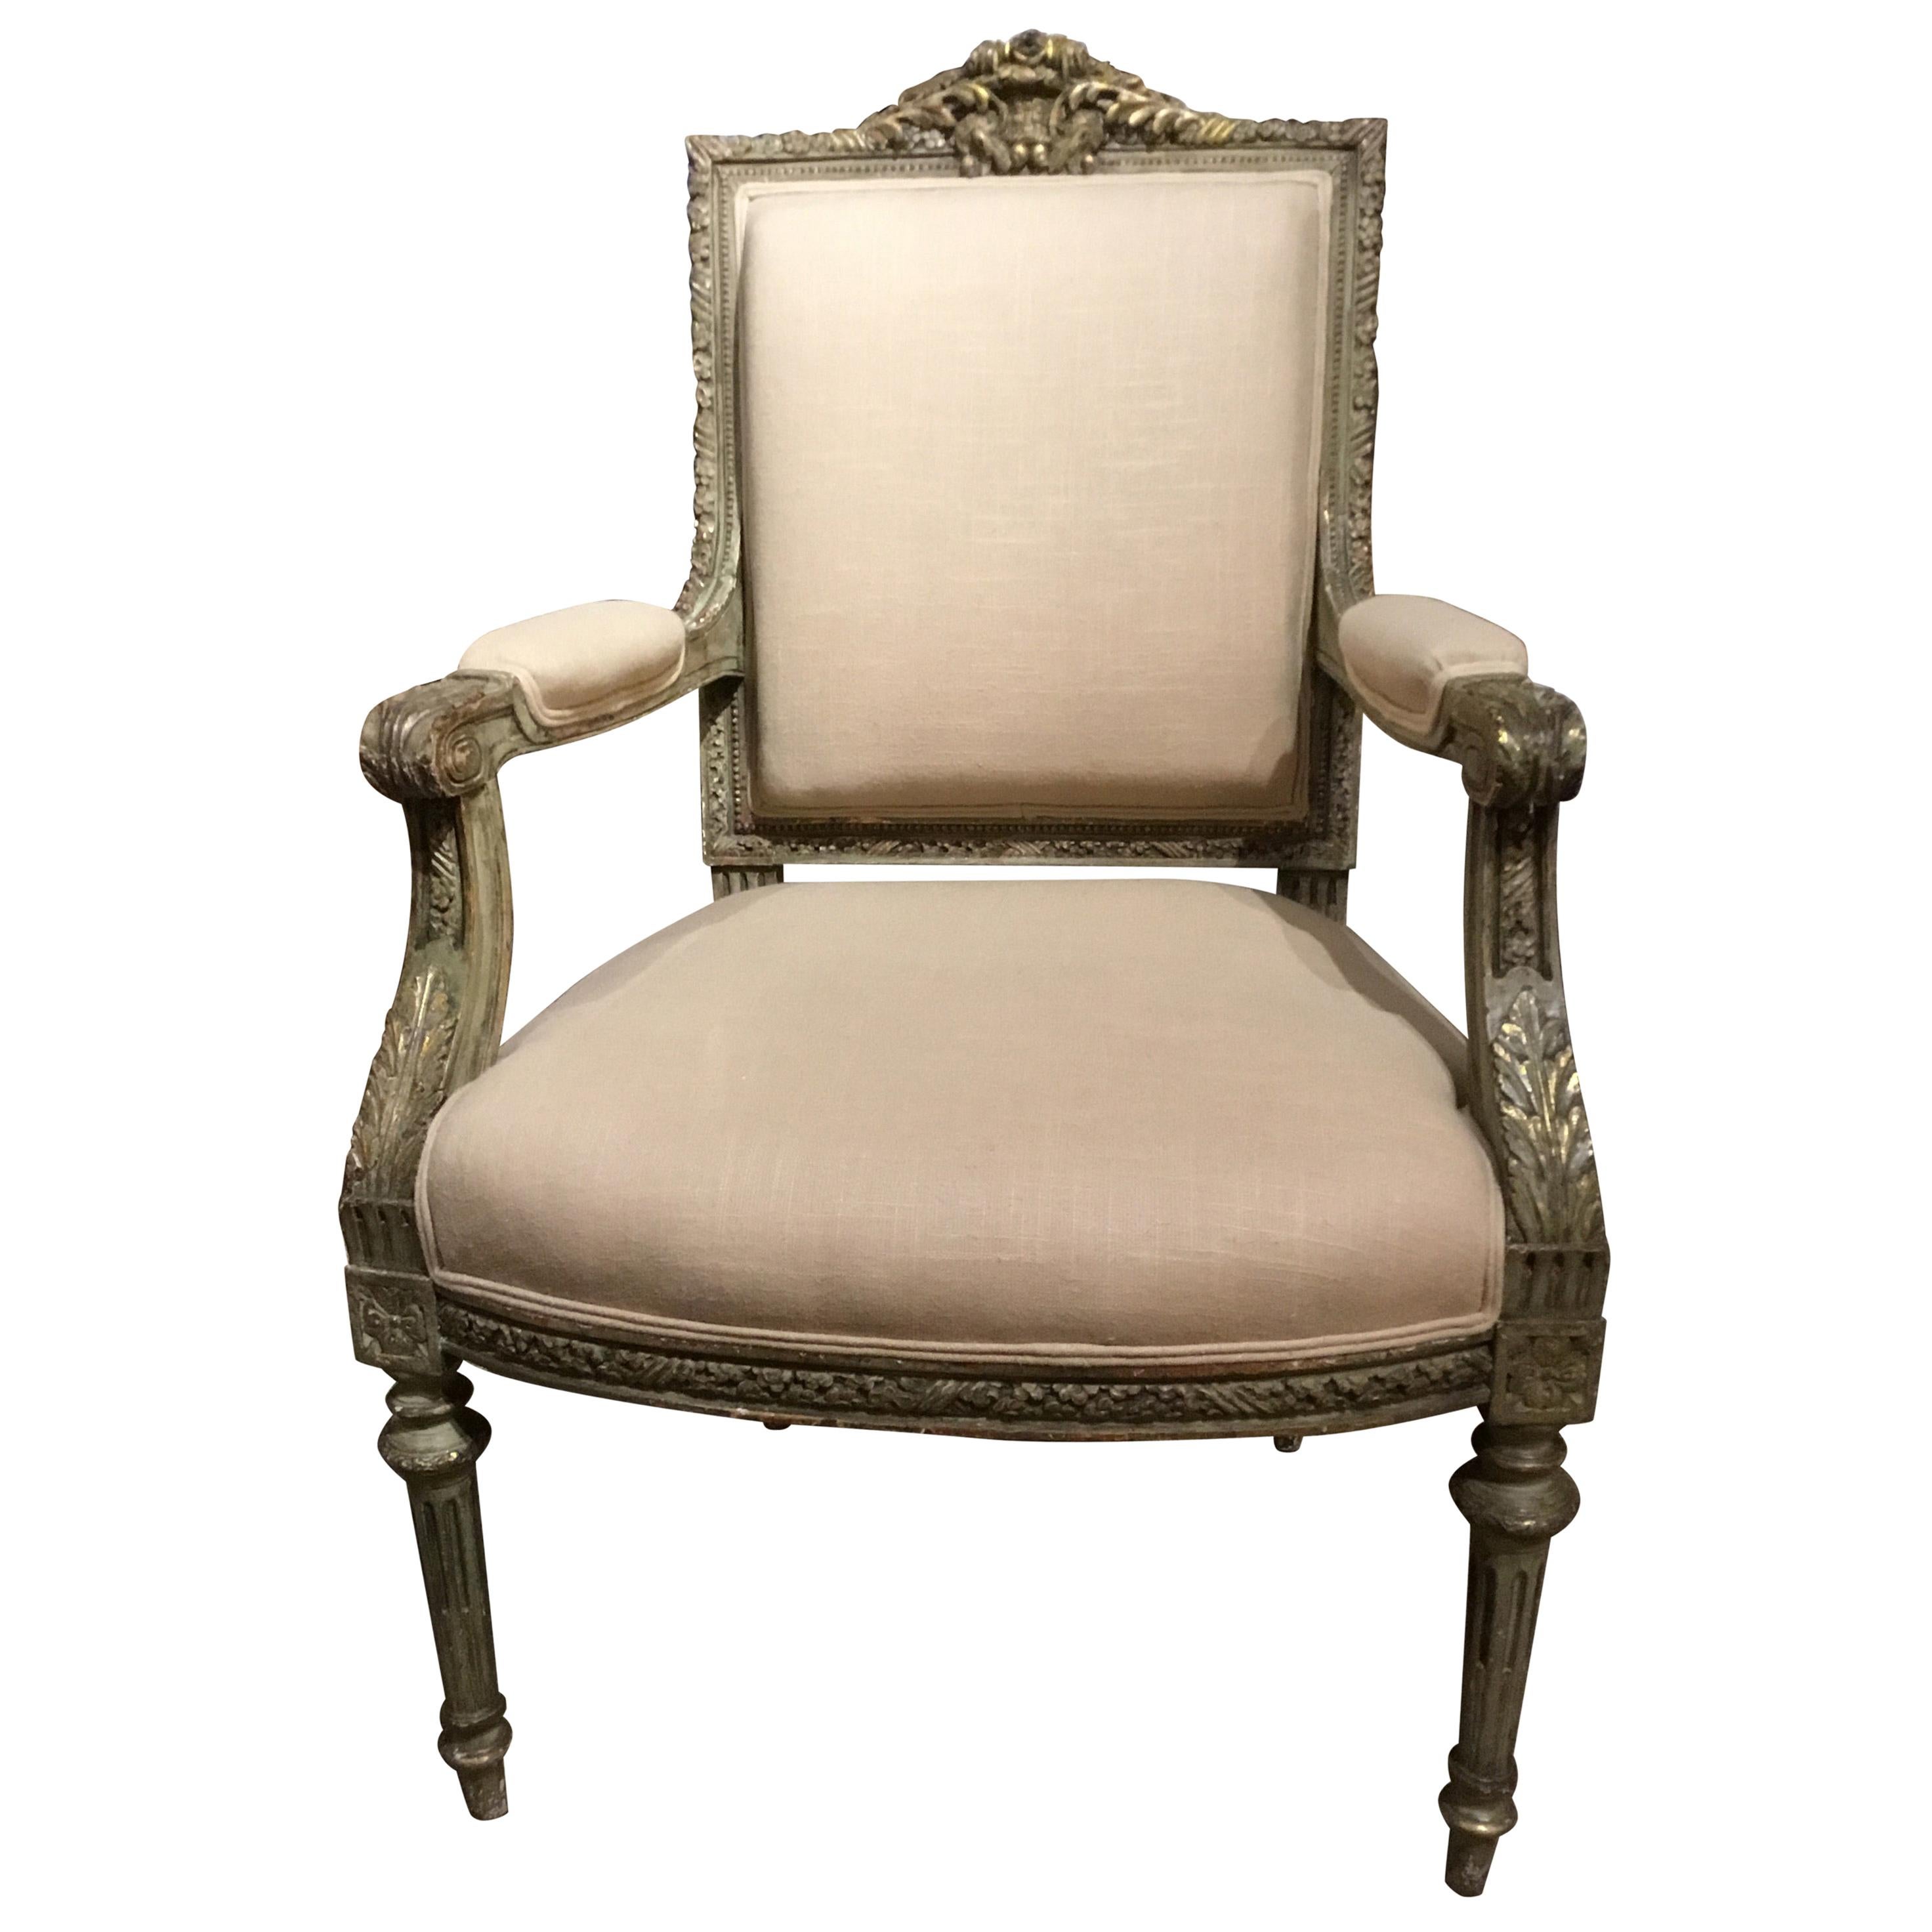 Louis XVI-Style Sam Chair or Fauteuil, Parcel Paint with Gilt Highlights